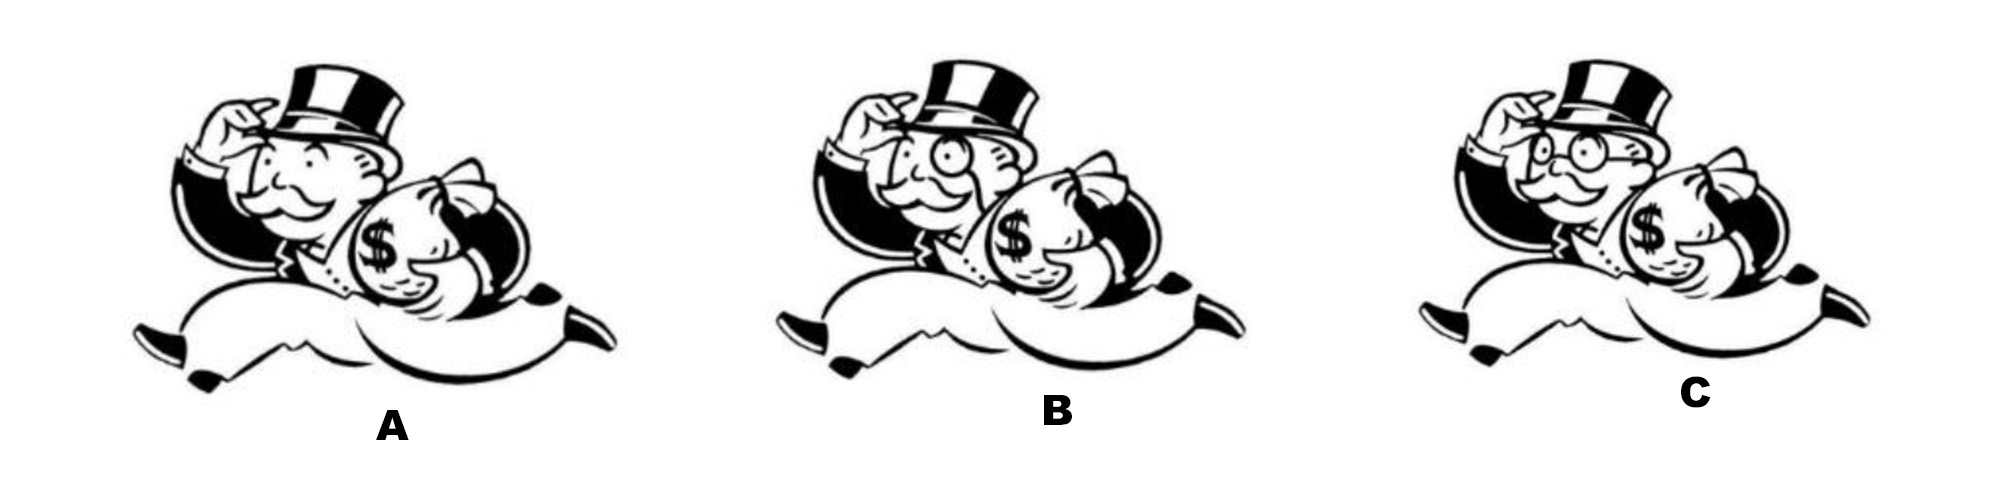 Three iterations of Mr. Monopoly